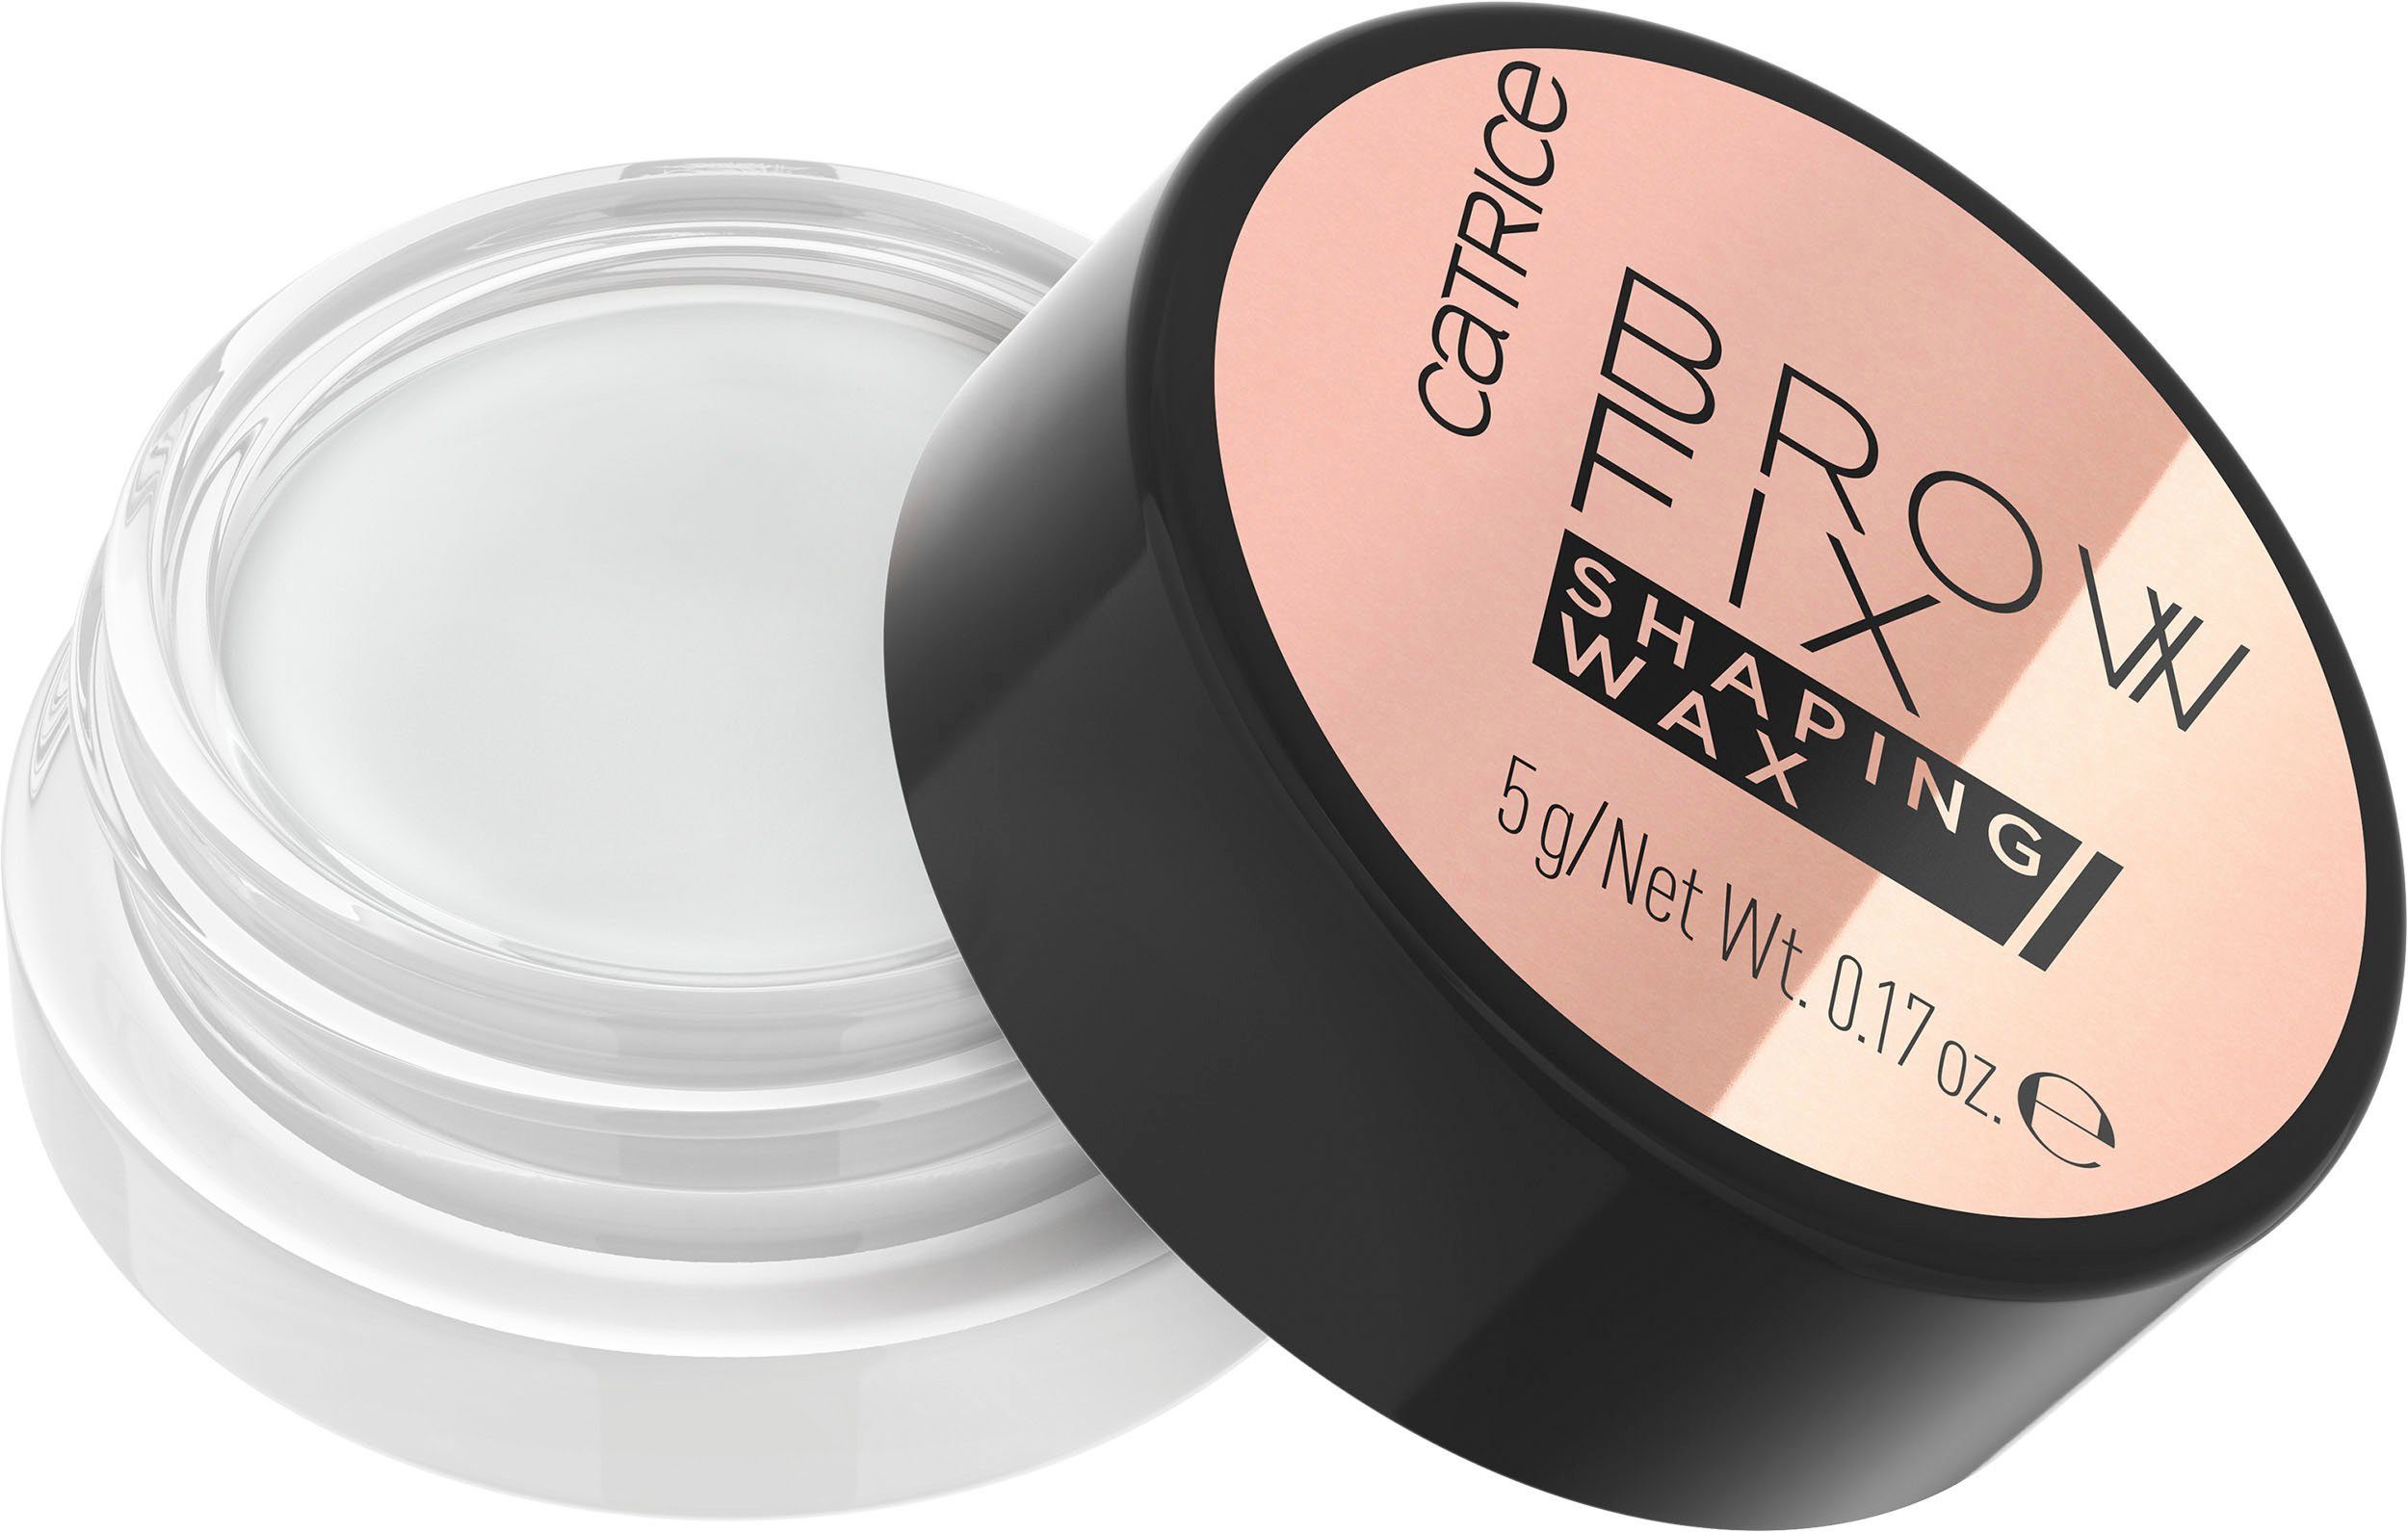 Catrice Augenbrauen-Gel Fix Brow 010, Shaping 3-tlg. Catrice Wax